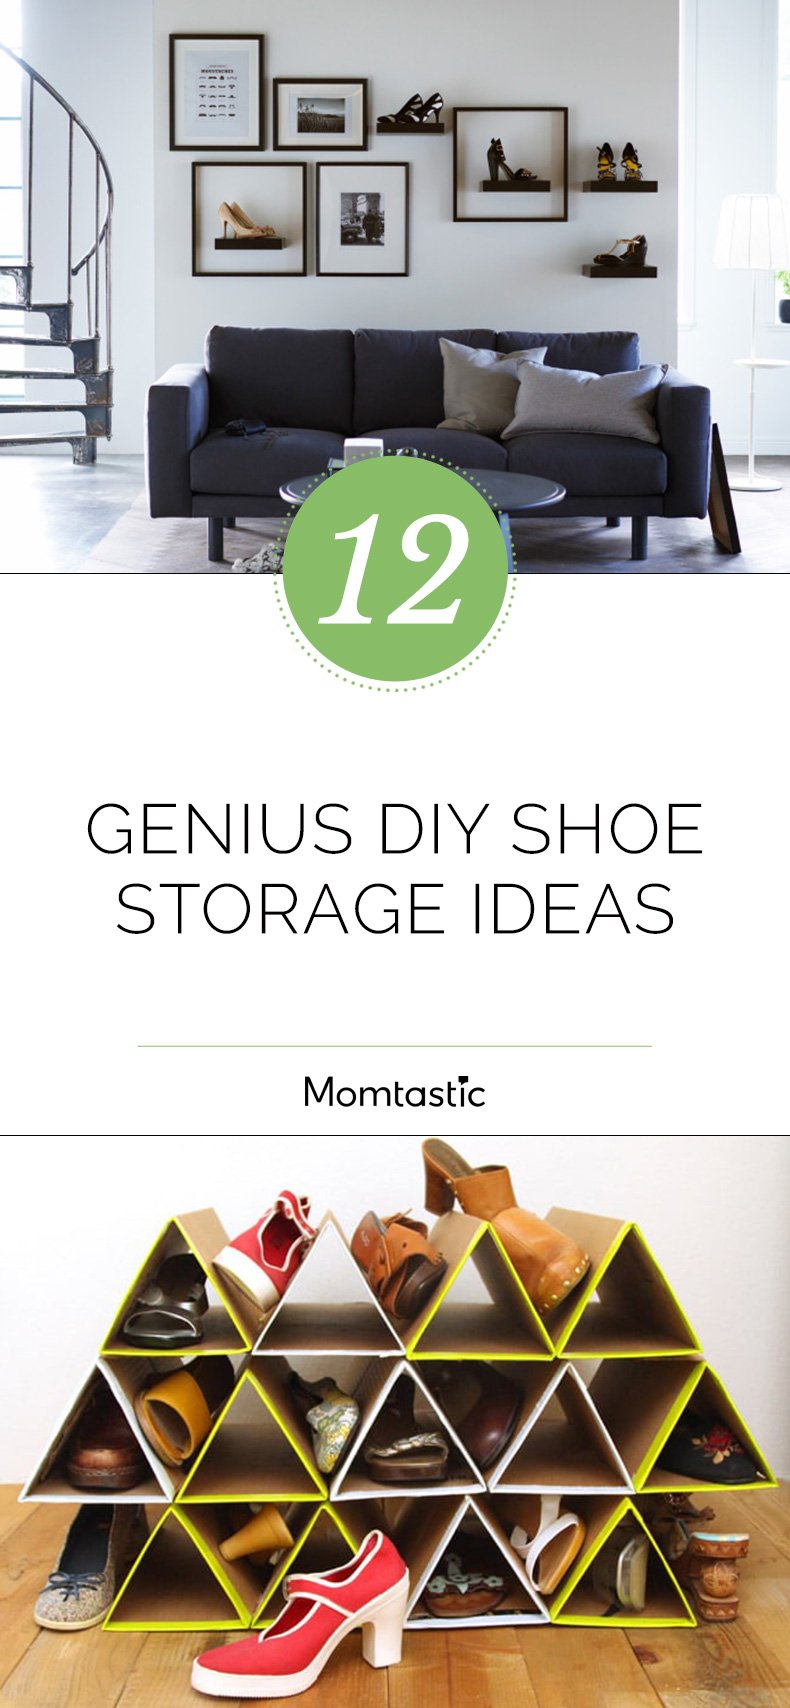 31 Genius Entryway Shoe Storage Ideas To Remove Clutter and Save